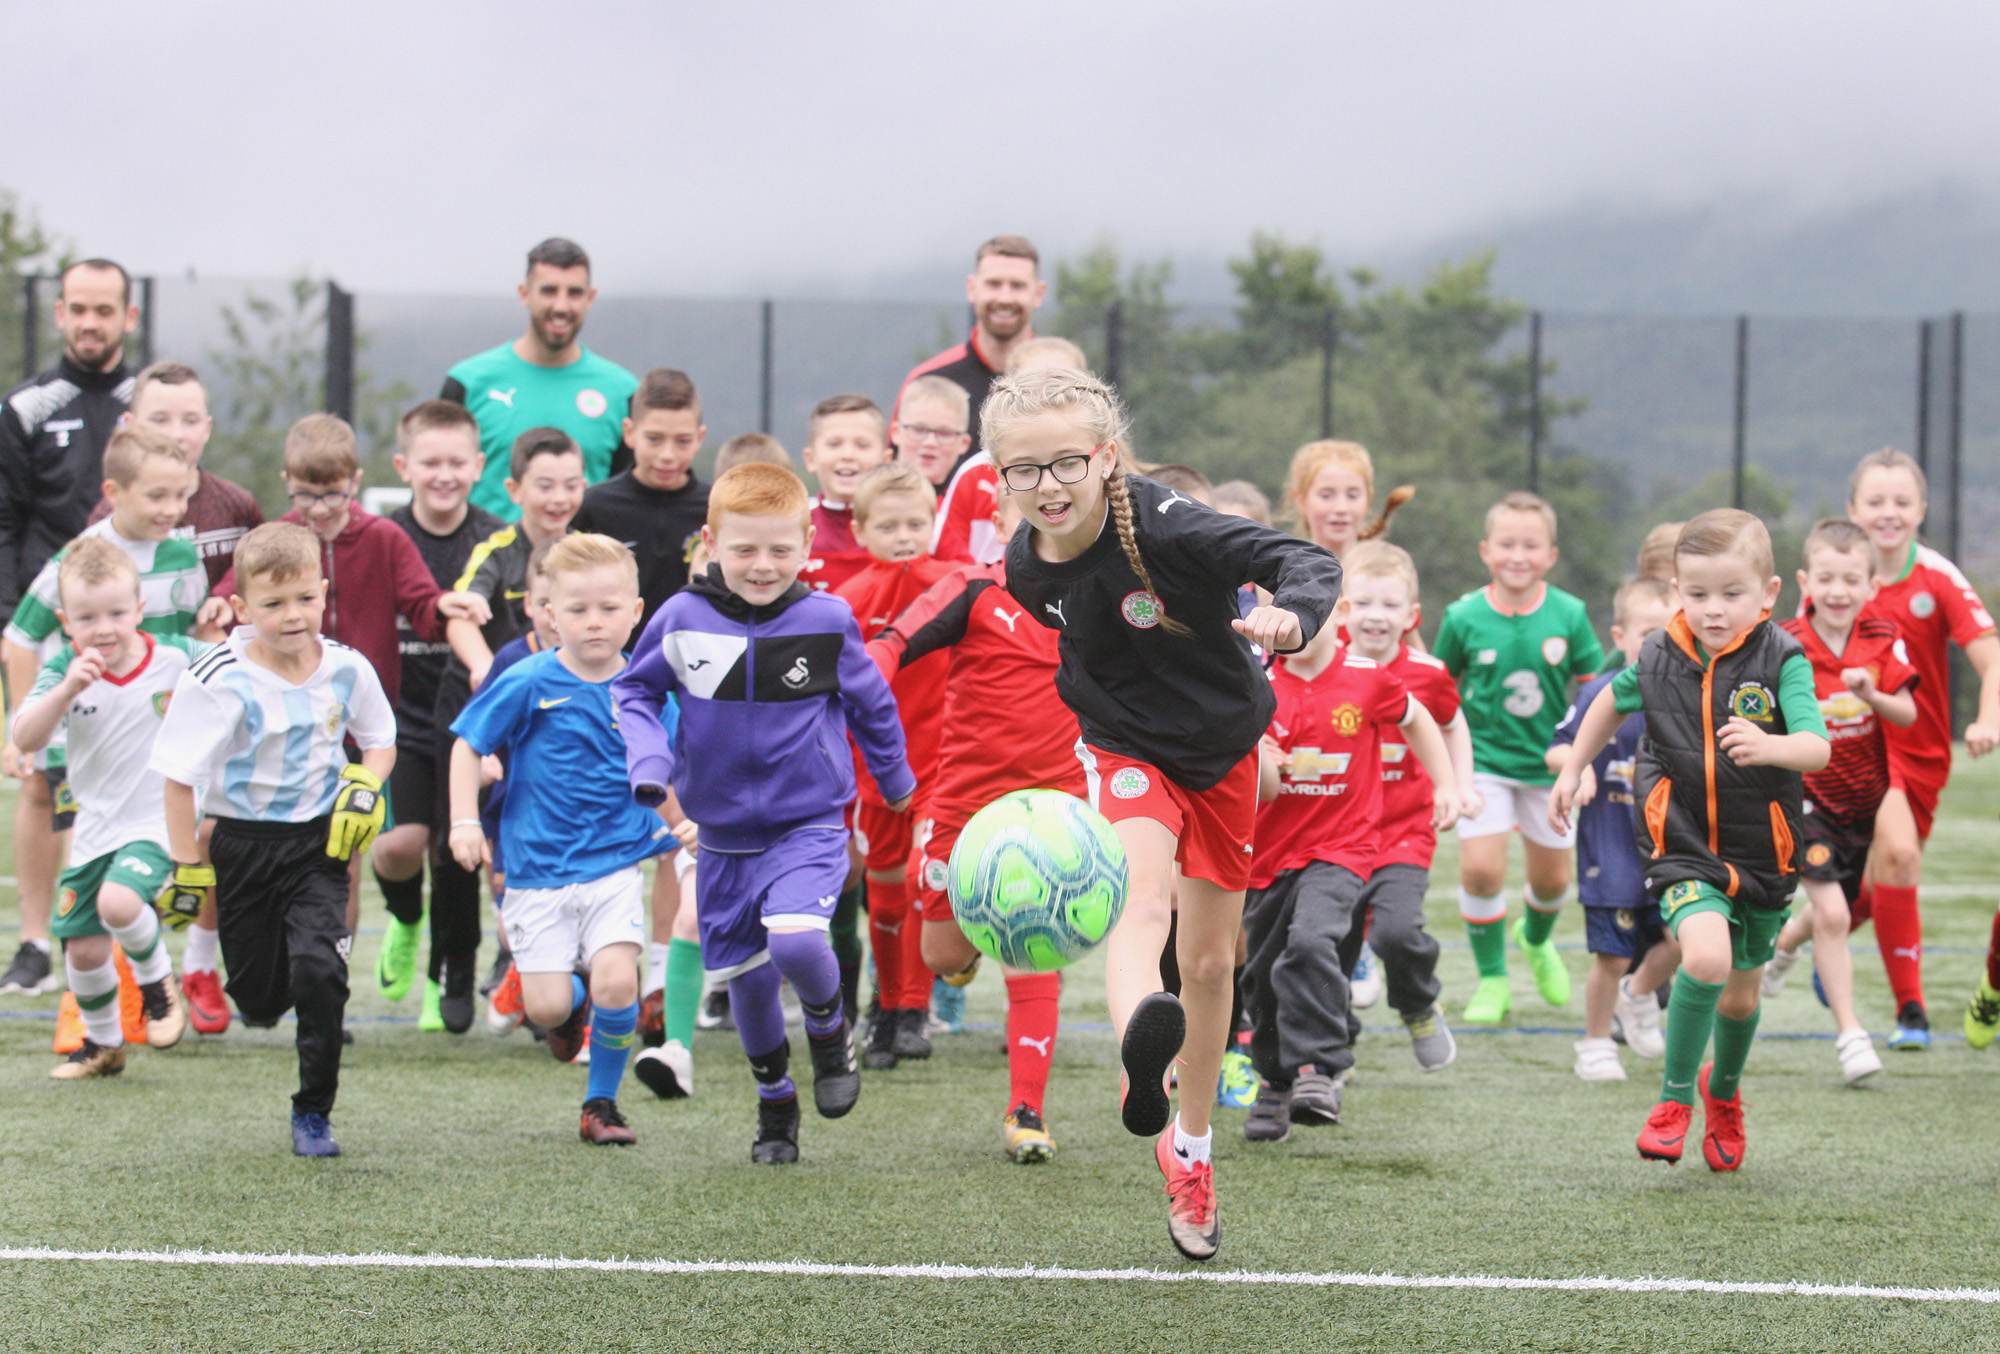 Lucy Loughens kicks off the Mini-World Cup at the Bone Hills pitches as part of the Ardoyne and Bone Festival. Looking on are a number of top Irish League players who gave up their time to come along and pass on some valuable coaching tips